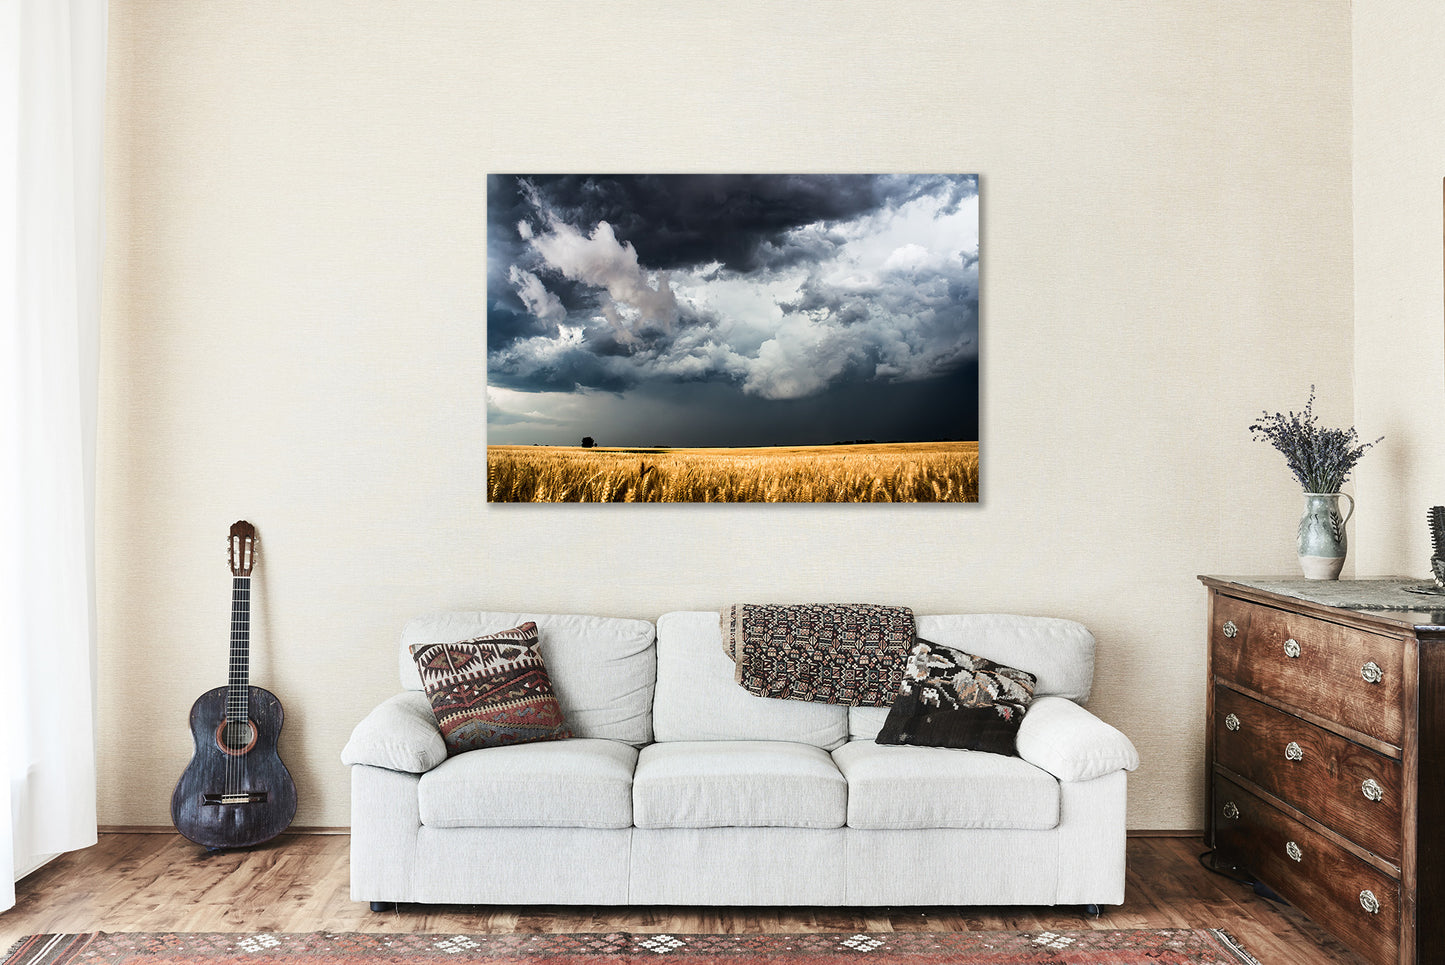 Country Metal Print (Ready to Hang) Photo on Aluminum of Storm Clouds Gathering Over Golden Wheat Field in Kansas Western Wall Art Farmhouse Decor